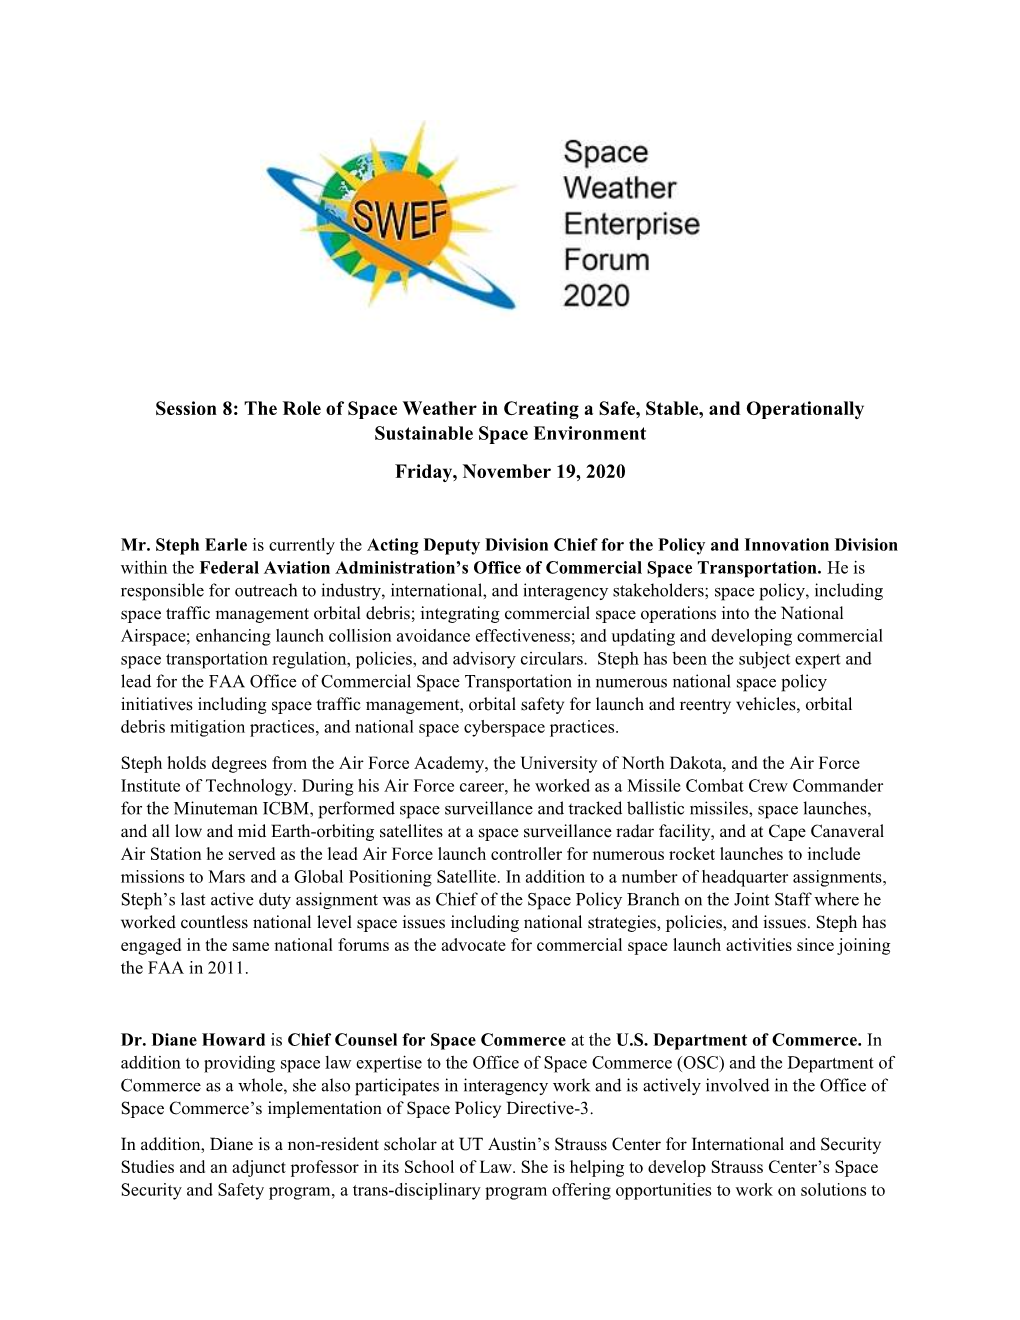 The Role of Space Weather in Creating a Safe, Stable, and Operationally Sustainable Space Environment Friday, November 19, 2020